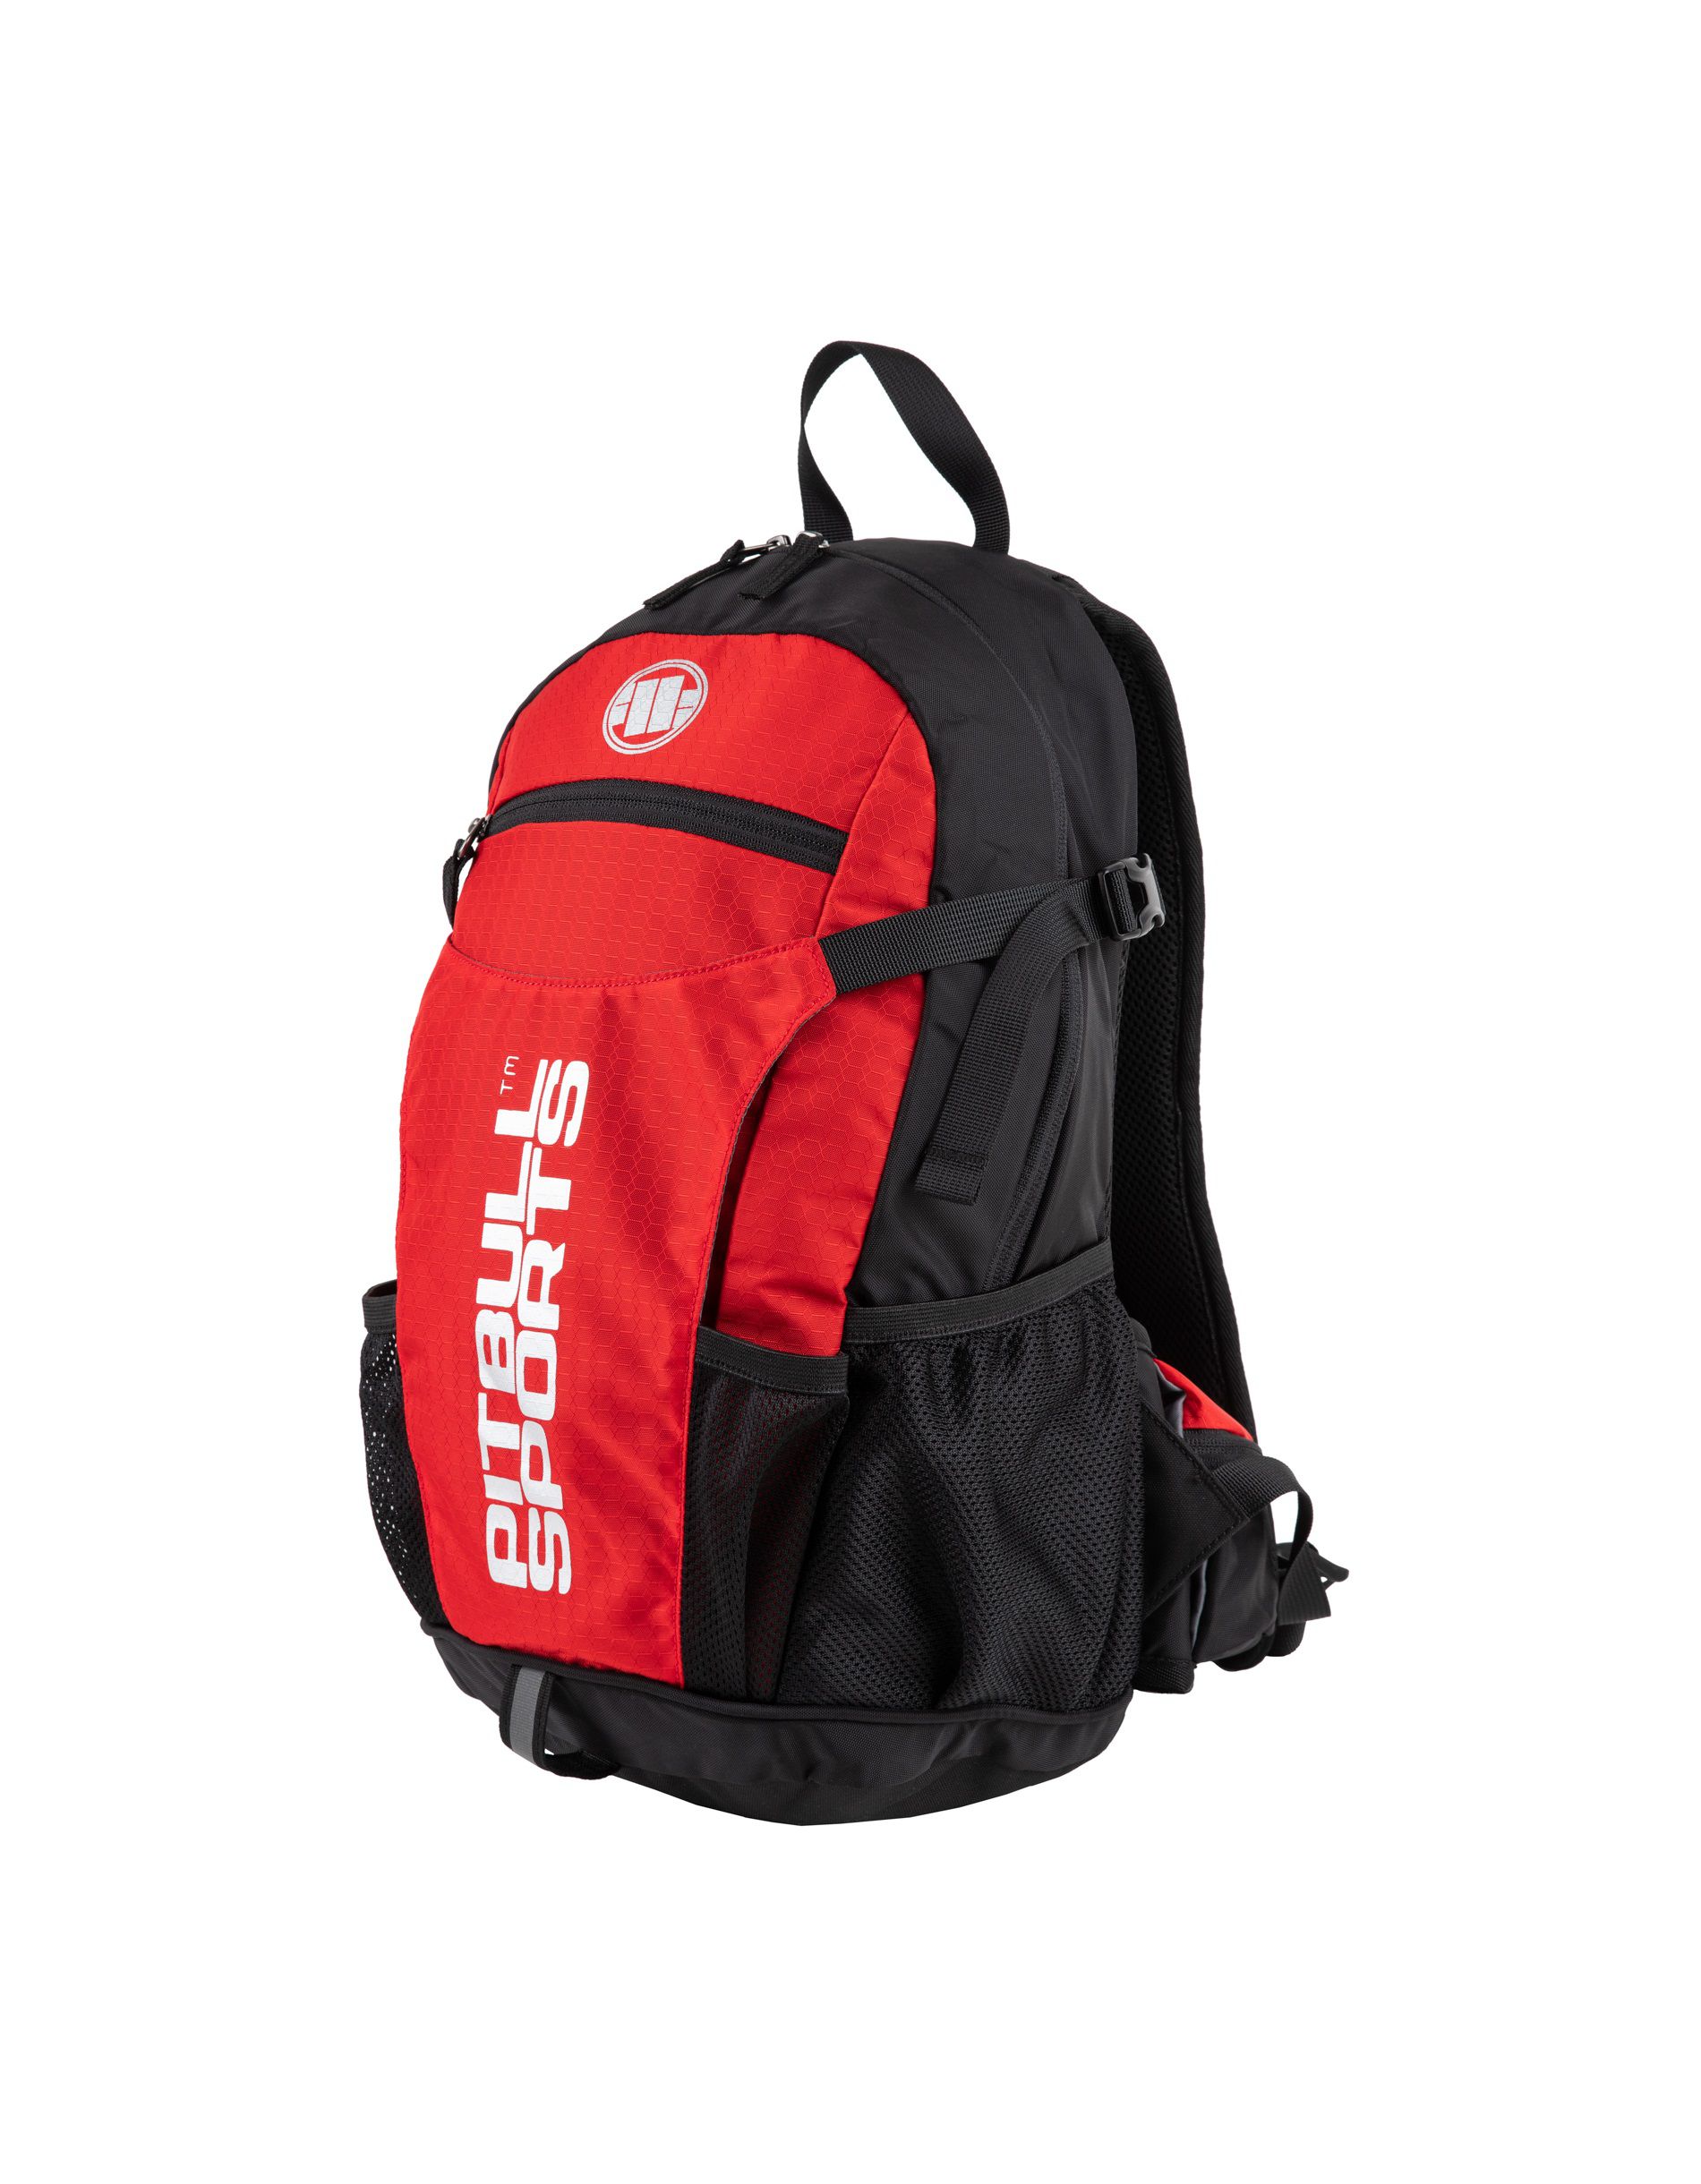 https://vandalshop.hr/wp-content/uploads/2023/09/cycling-backpack-pitbull-sports-red_61290b335024a.jpg